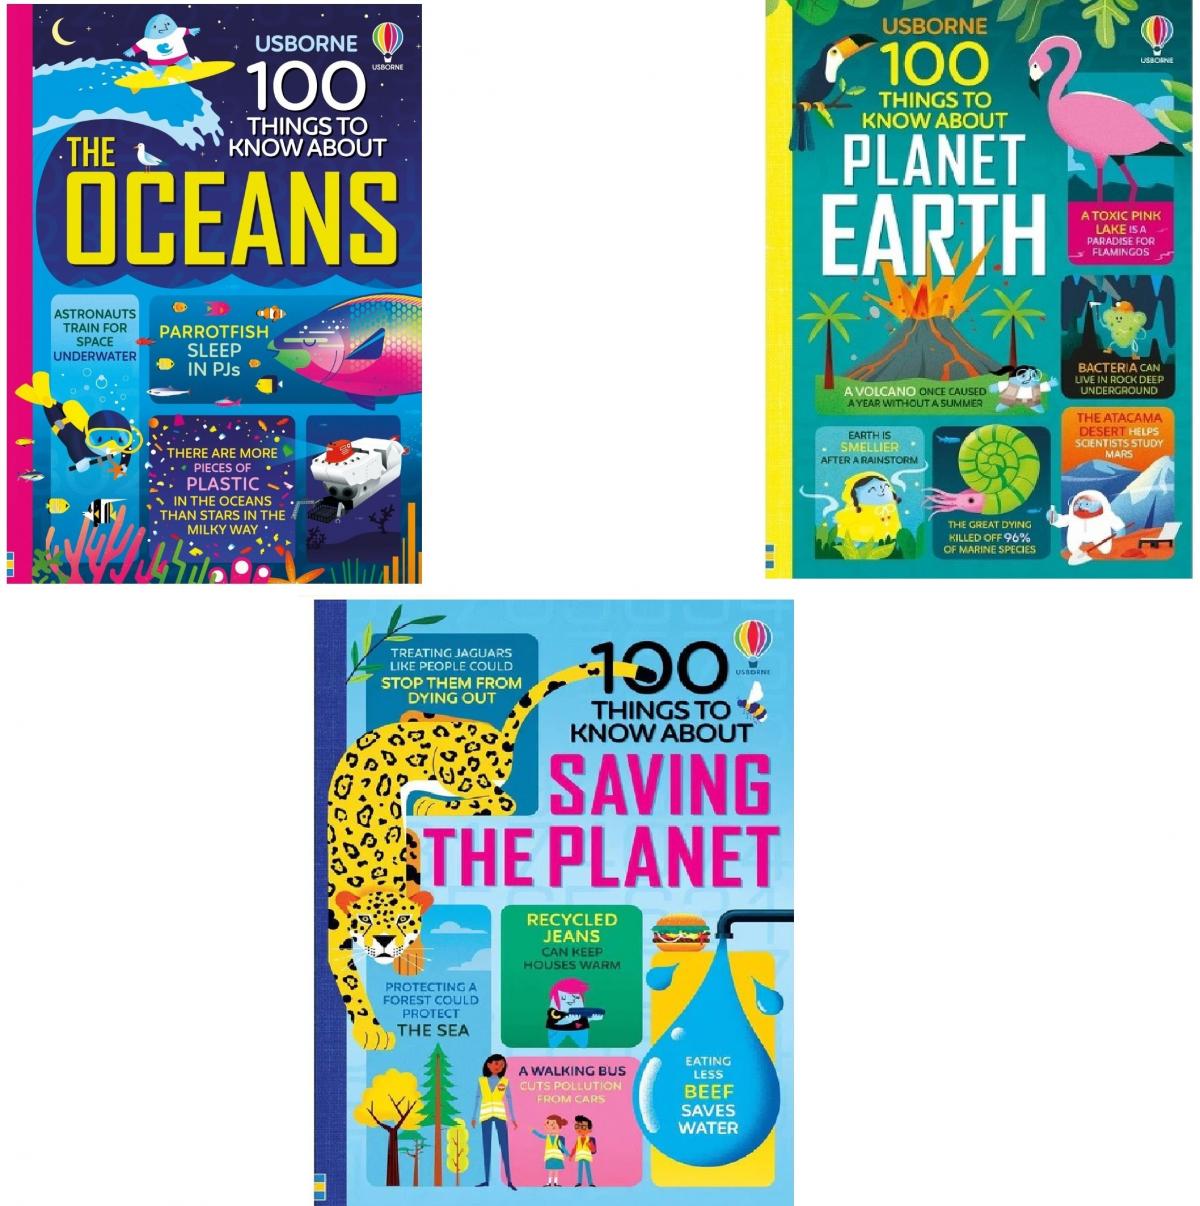 USBORNE | 100 Things to Know About 3 books(Oceans, Planet 